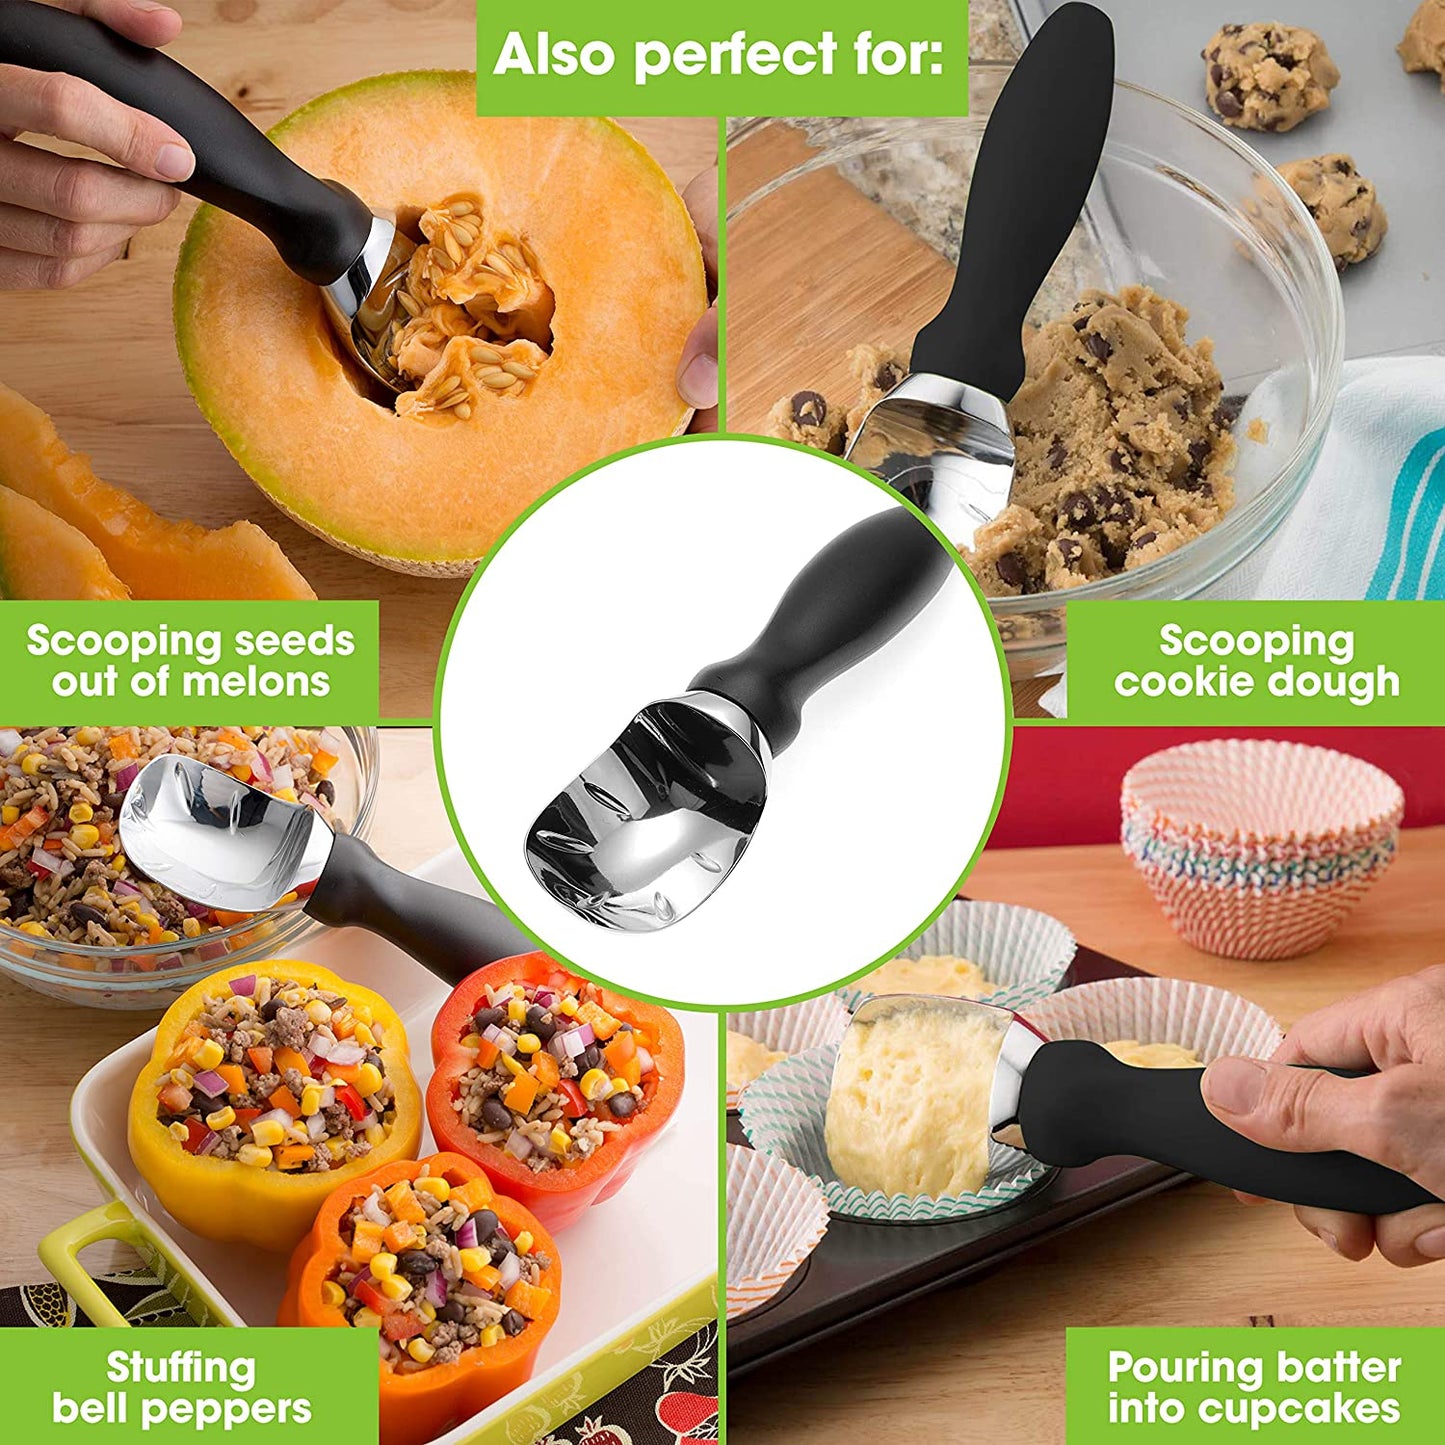 Spring Chef Ice Cream Scoop with Comfortable Handle, Black